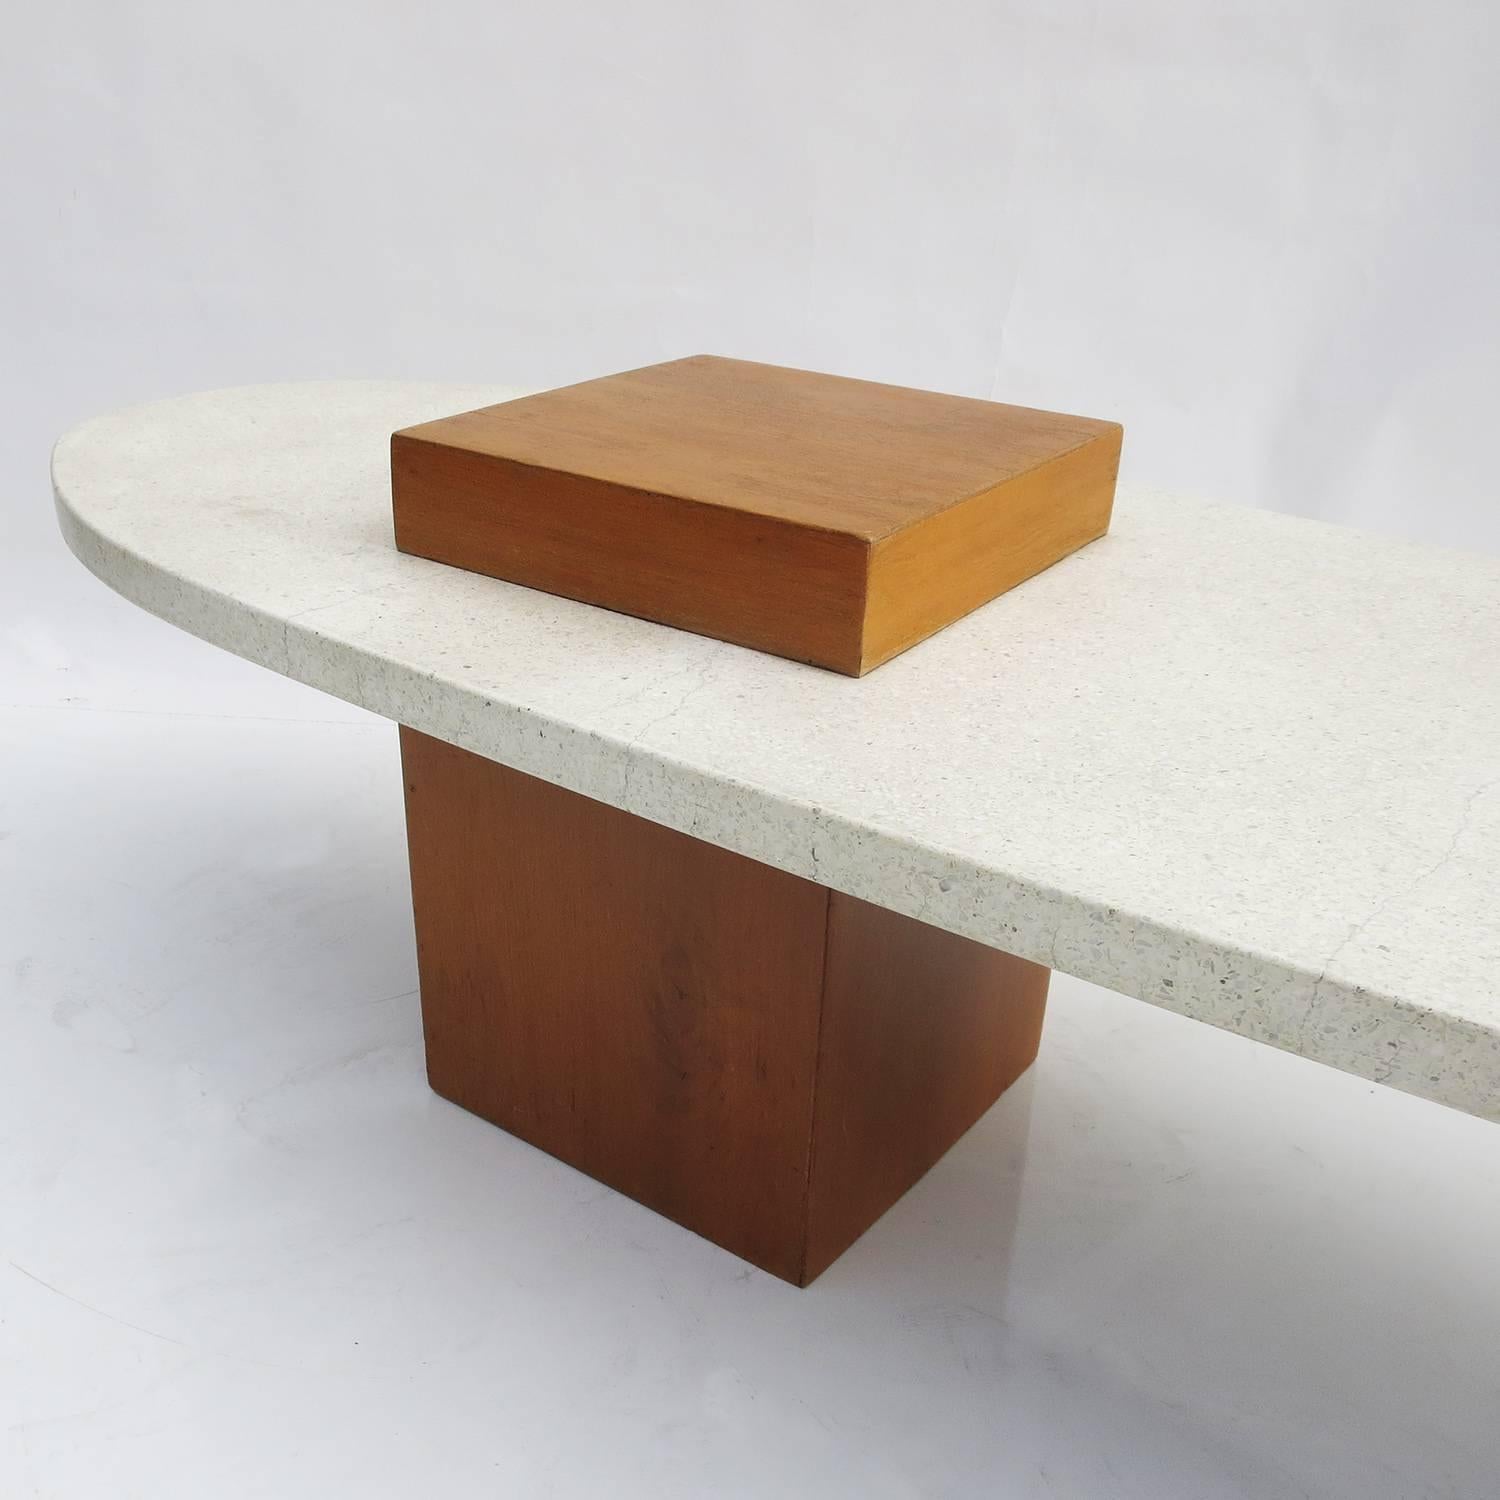 Harvey Probber (American 1922-2003) is known as the inventor of modular furniture, seating that was flexible in its layout. He formed Harver Probber Inc. in 1945, and created modern furniture into the 1970s. This table is formed terrazzo over a